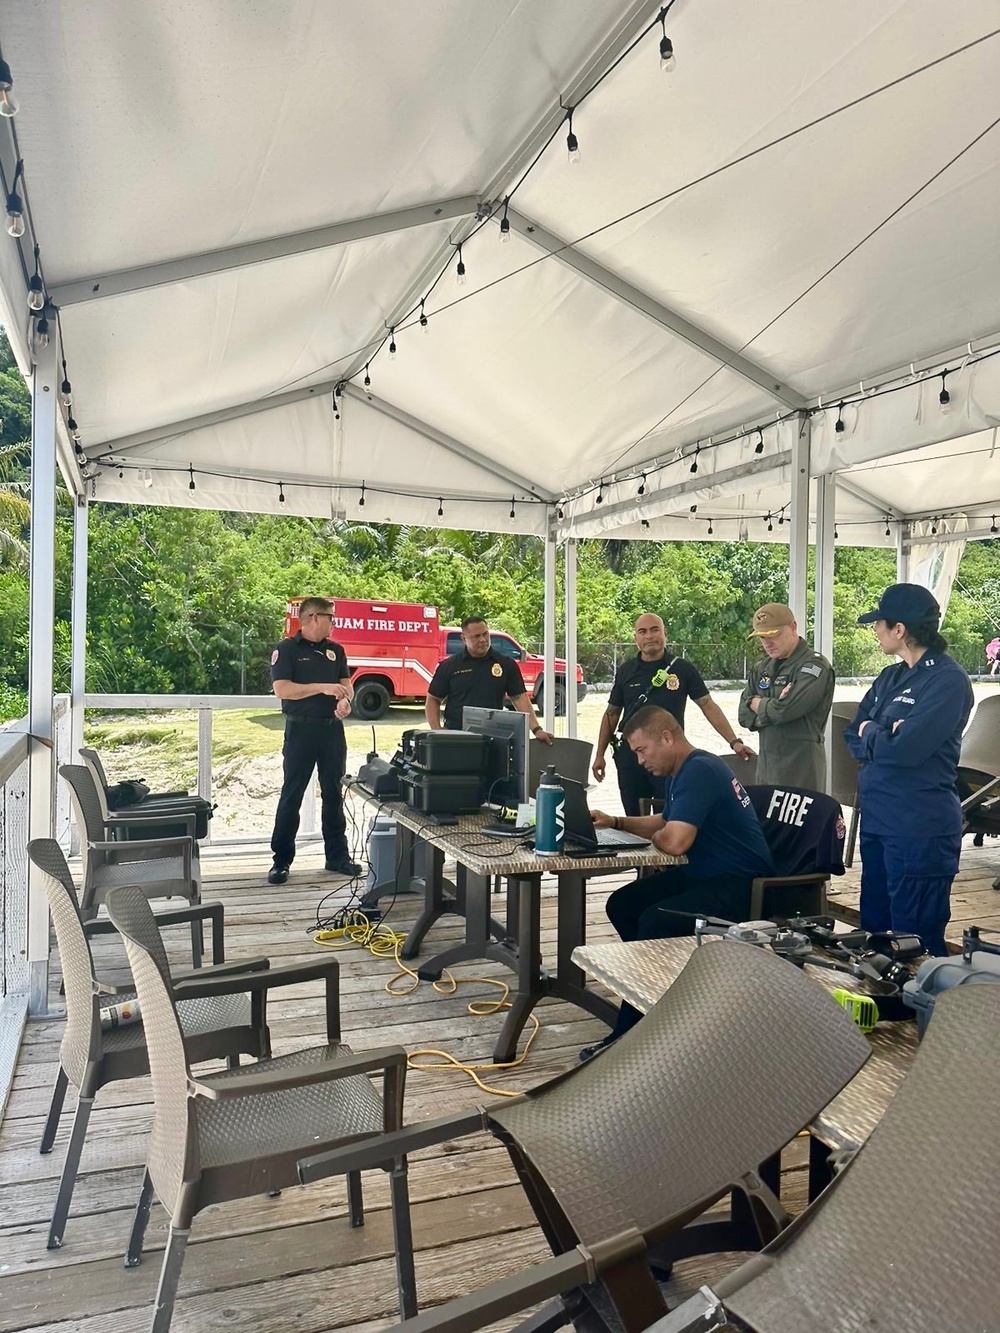 Joint search underway for possible distressed swimmer near Gun Beach, Guam